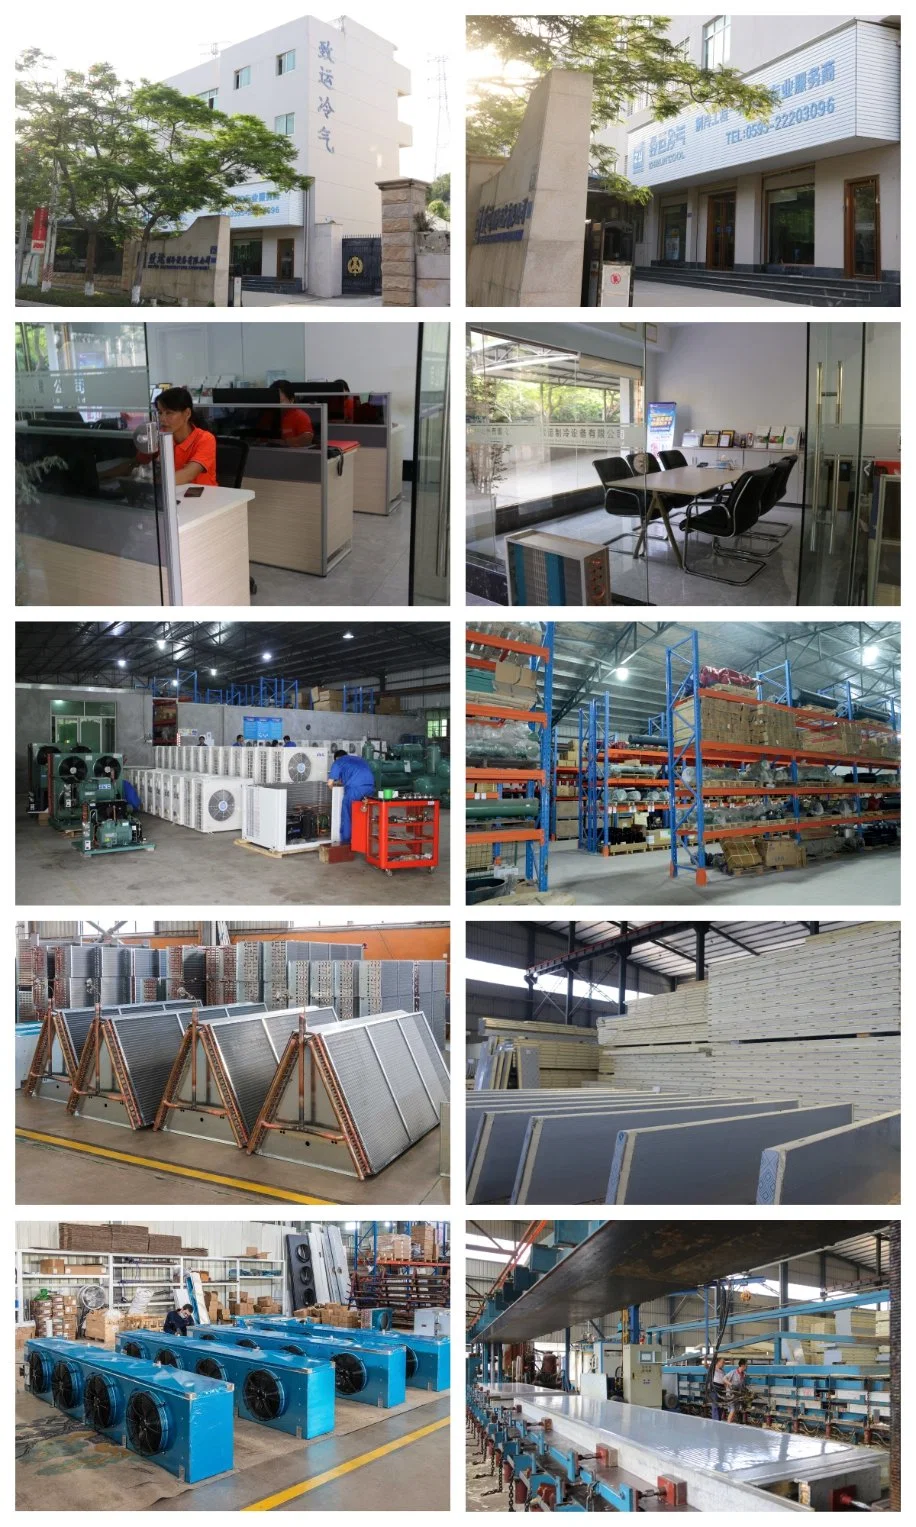 Zyc Customized Design Cold Storage Walk-in Chiller Freezer Room Quick Freezing for Refrigeration in Food Processing Farms Warehouse